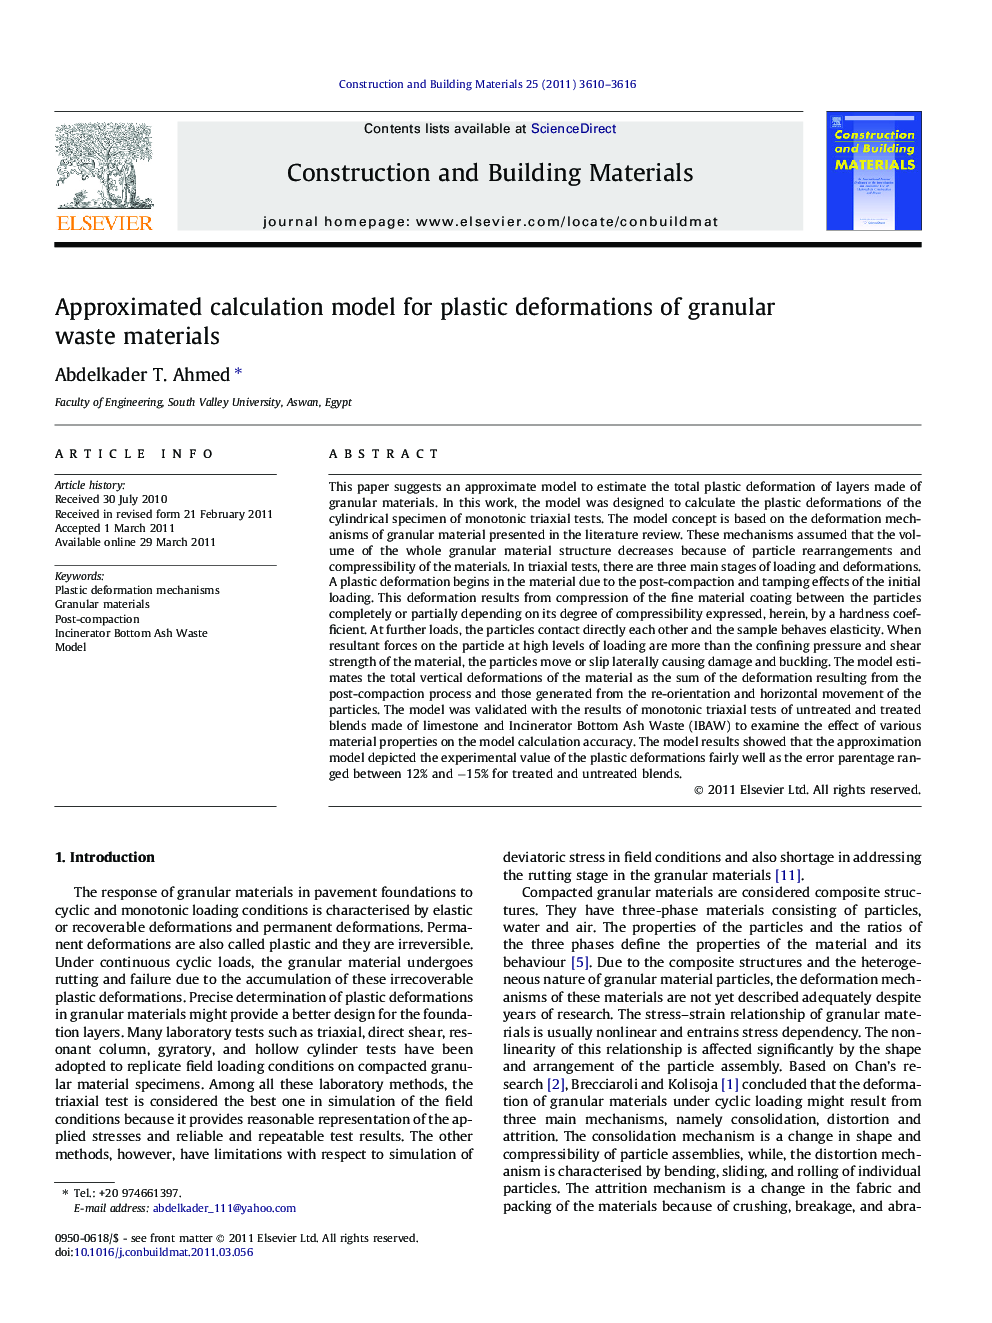 Approximated calculation model for plastic deformations of granular waste materials